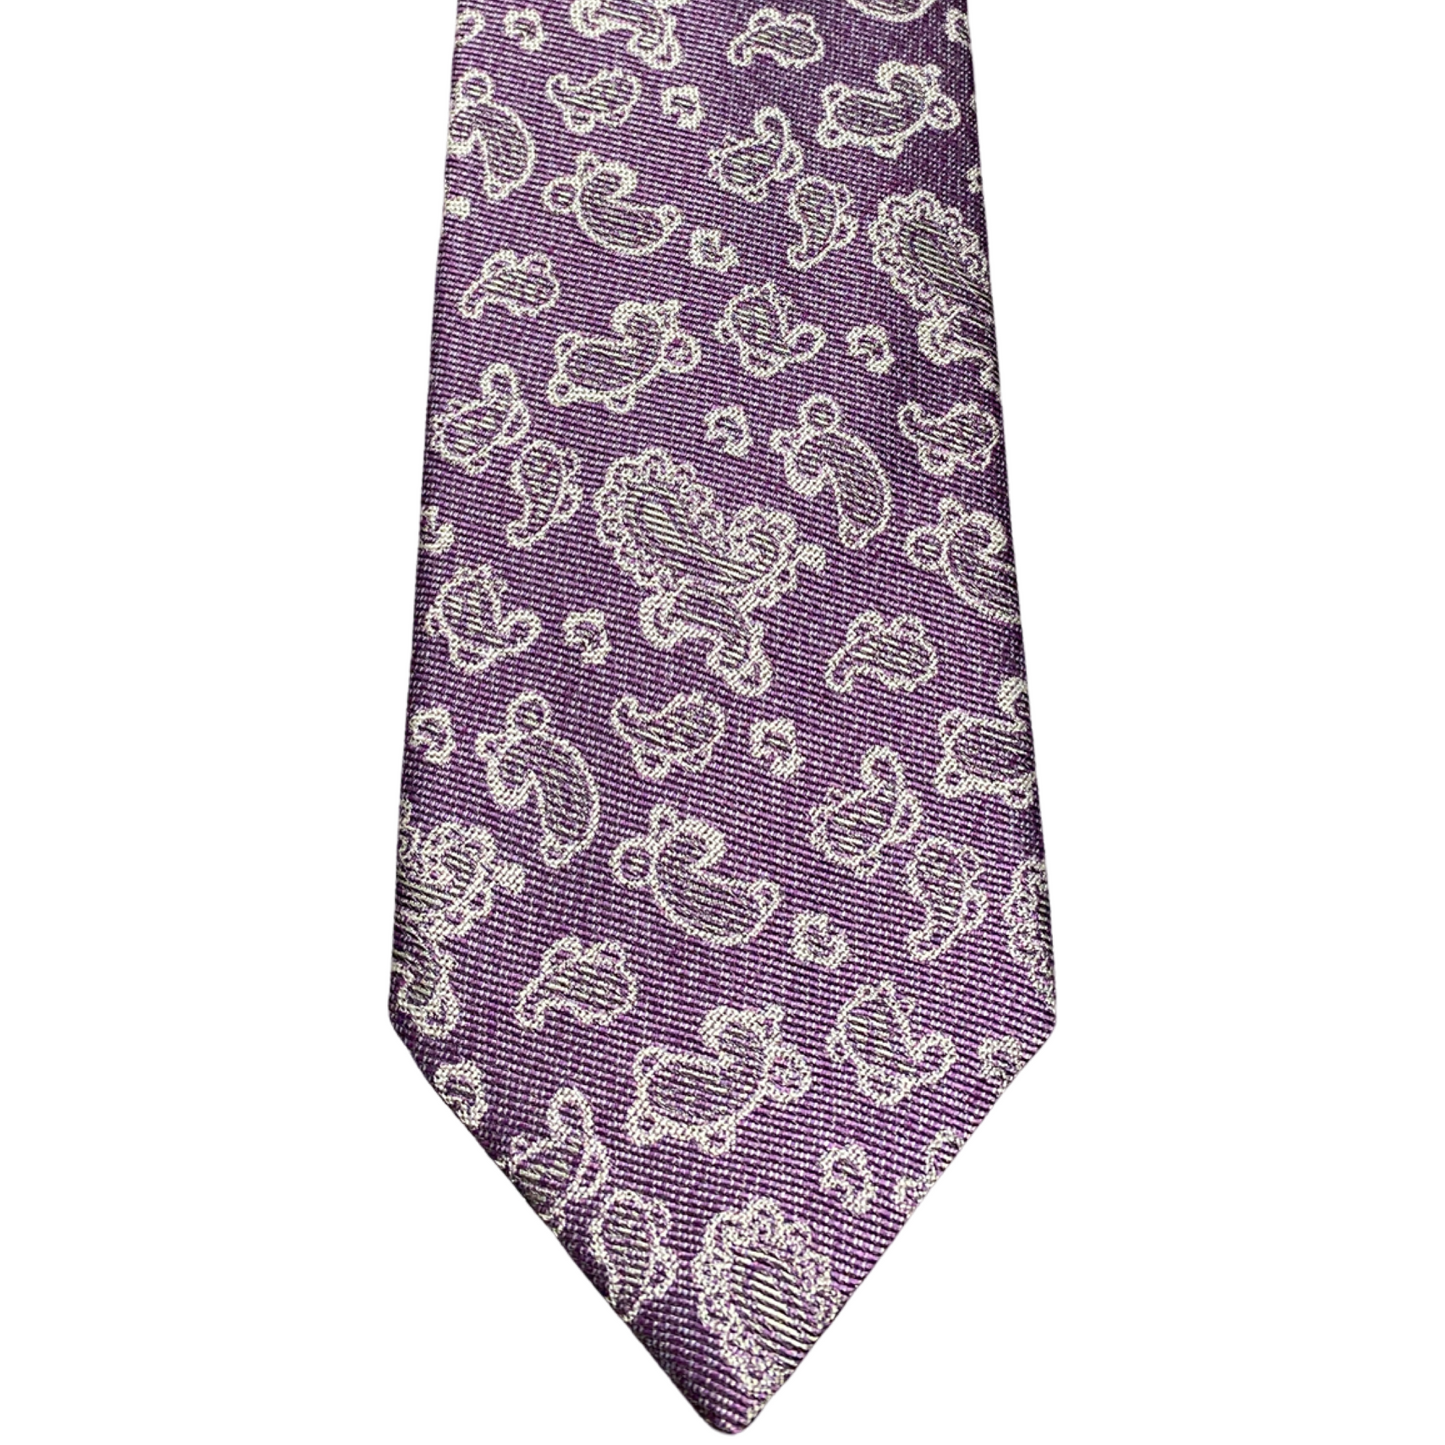 This Gian Marco Venturi microfibre purple ie has a paisley pattern, making it a nice pairing with a crisp white or lavender Scoop dress shirt, a charcoal grey suit and black dress shoes.